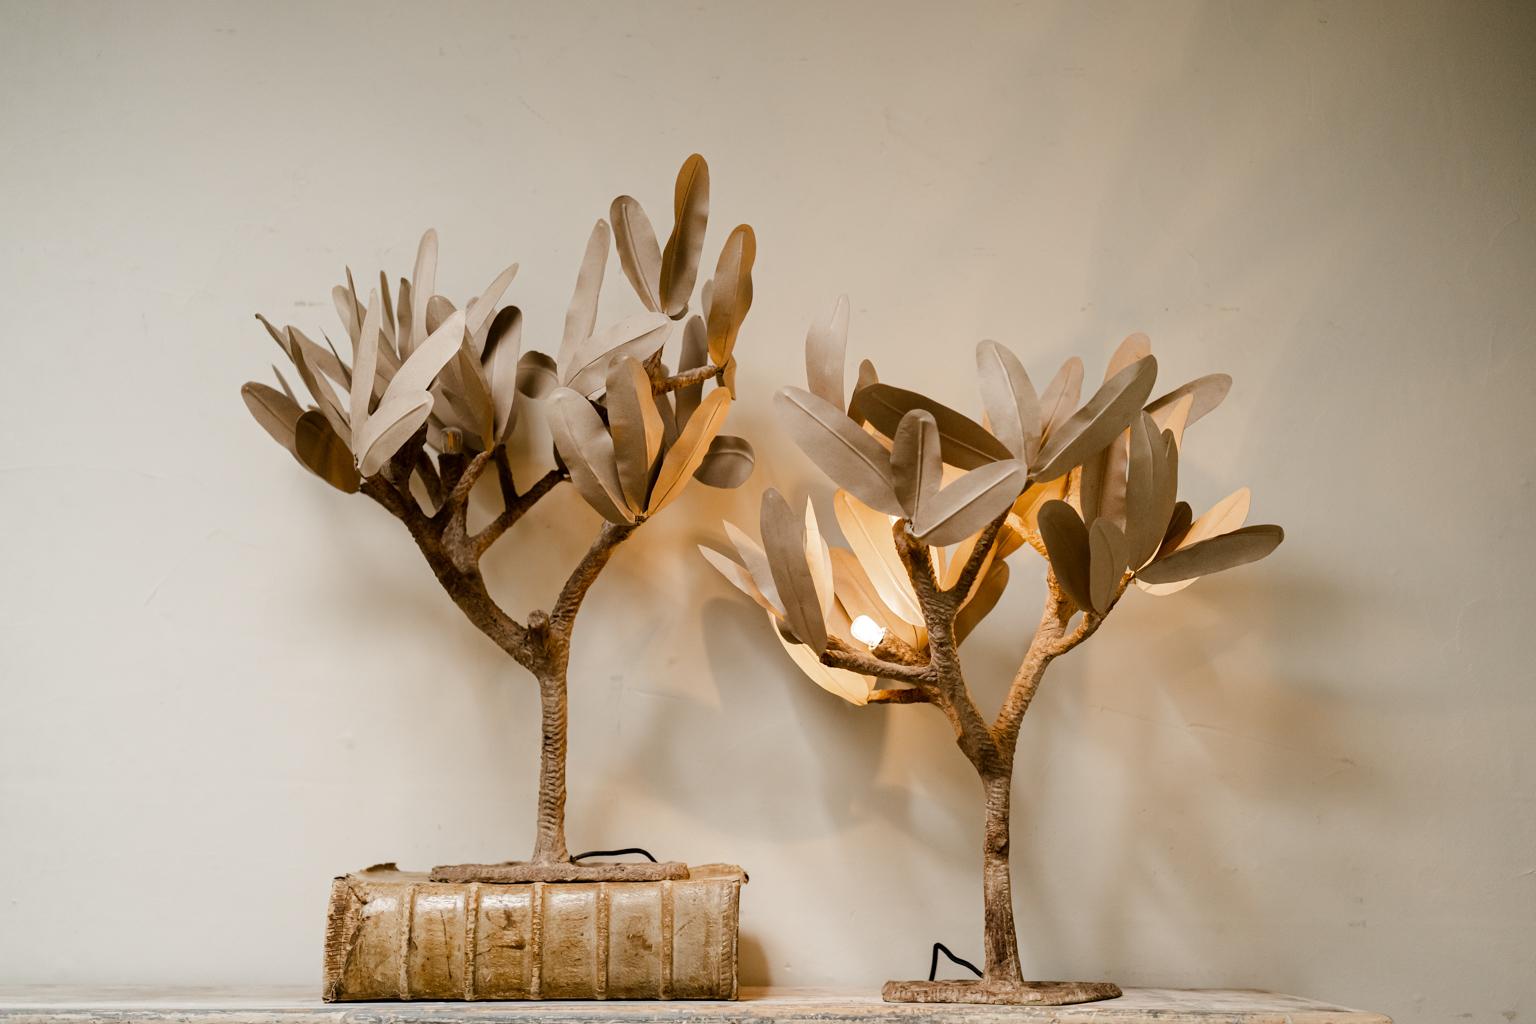 Contemporary Table Lamps by José Esteves, French Artist